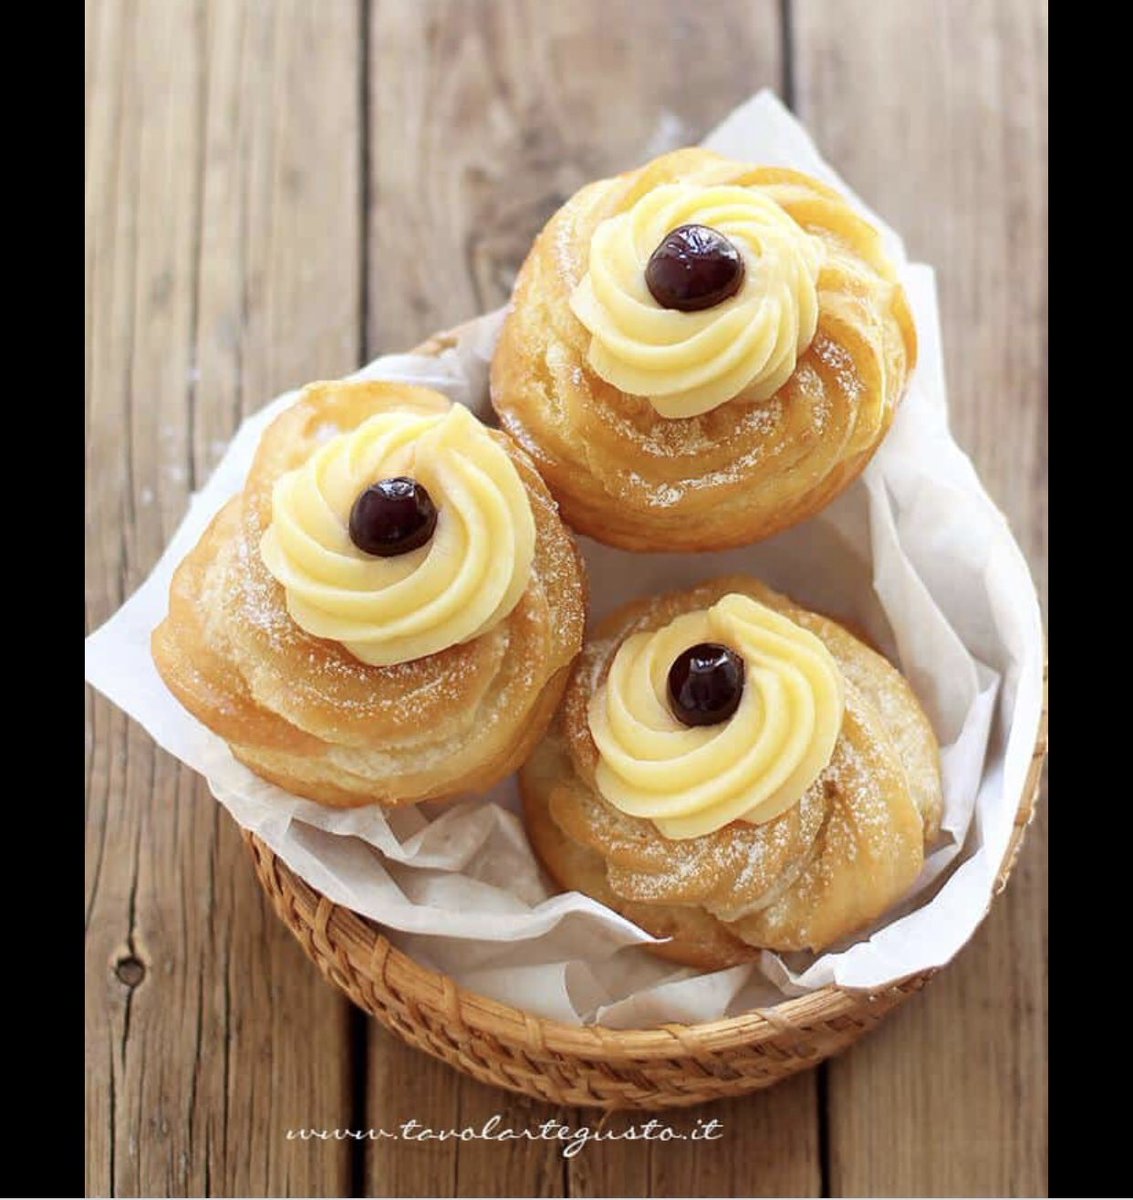 Today in Italy we celebrate all the Giuseppe e Giuseppina for their onomastico (name day) but also a Happy Father’s Day!! No need to travel to Italy to have a San Giuseppe zeppola just visit your local Italian bakery! #zeppole #italianfathersday #SanGiuseppe